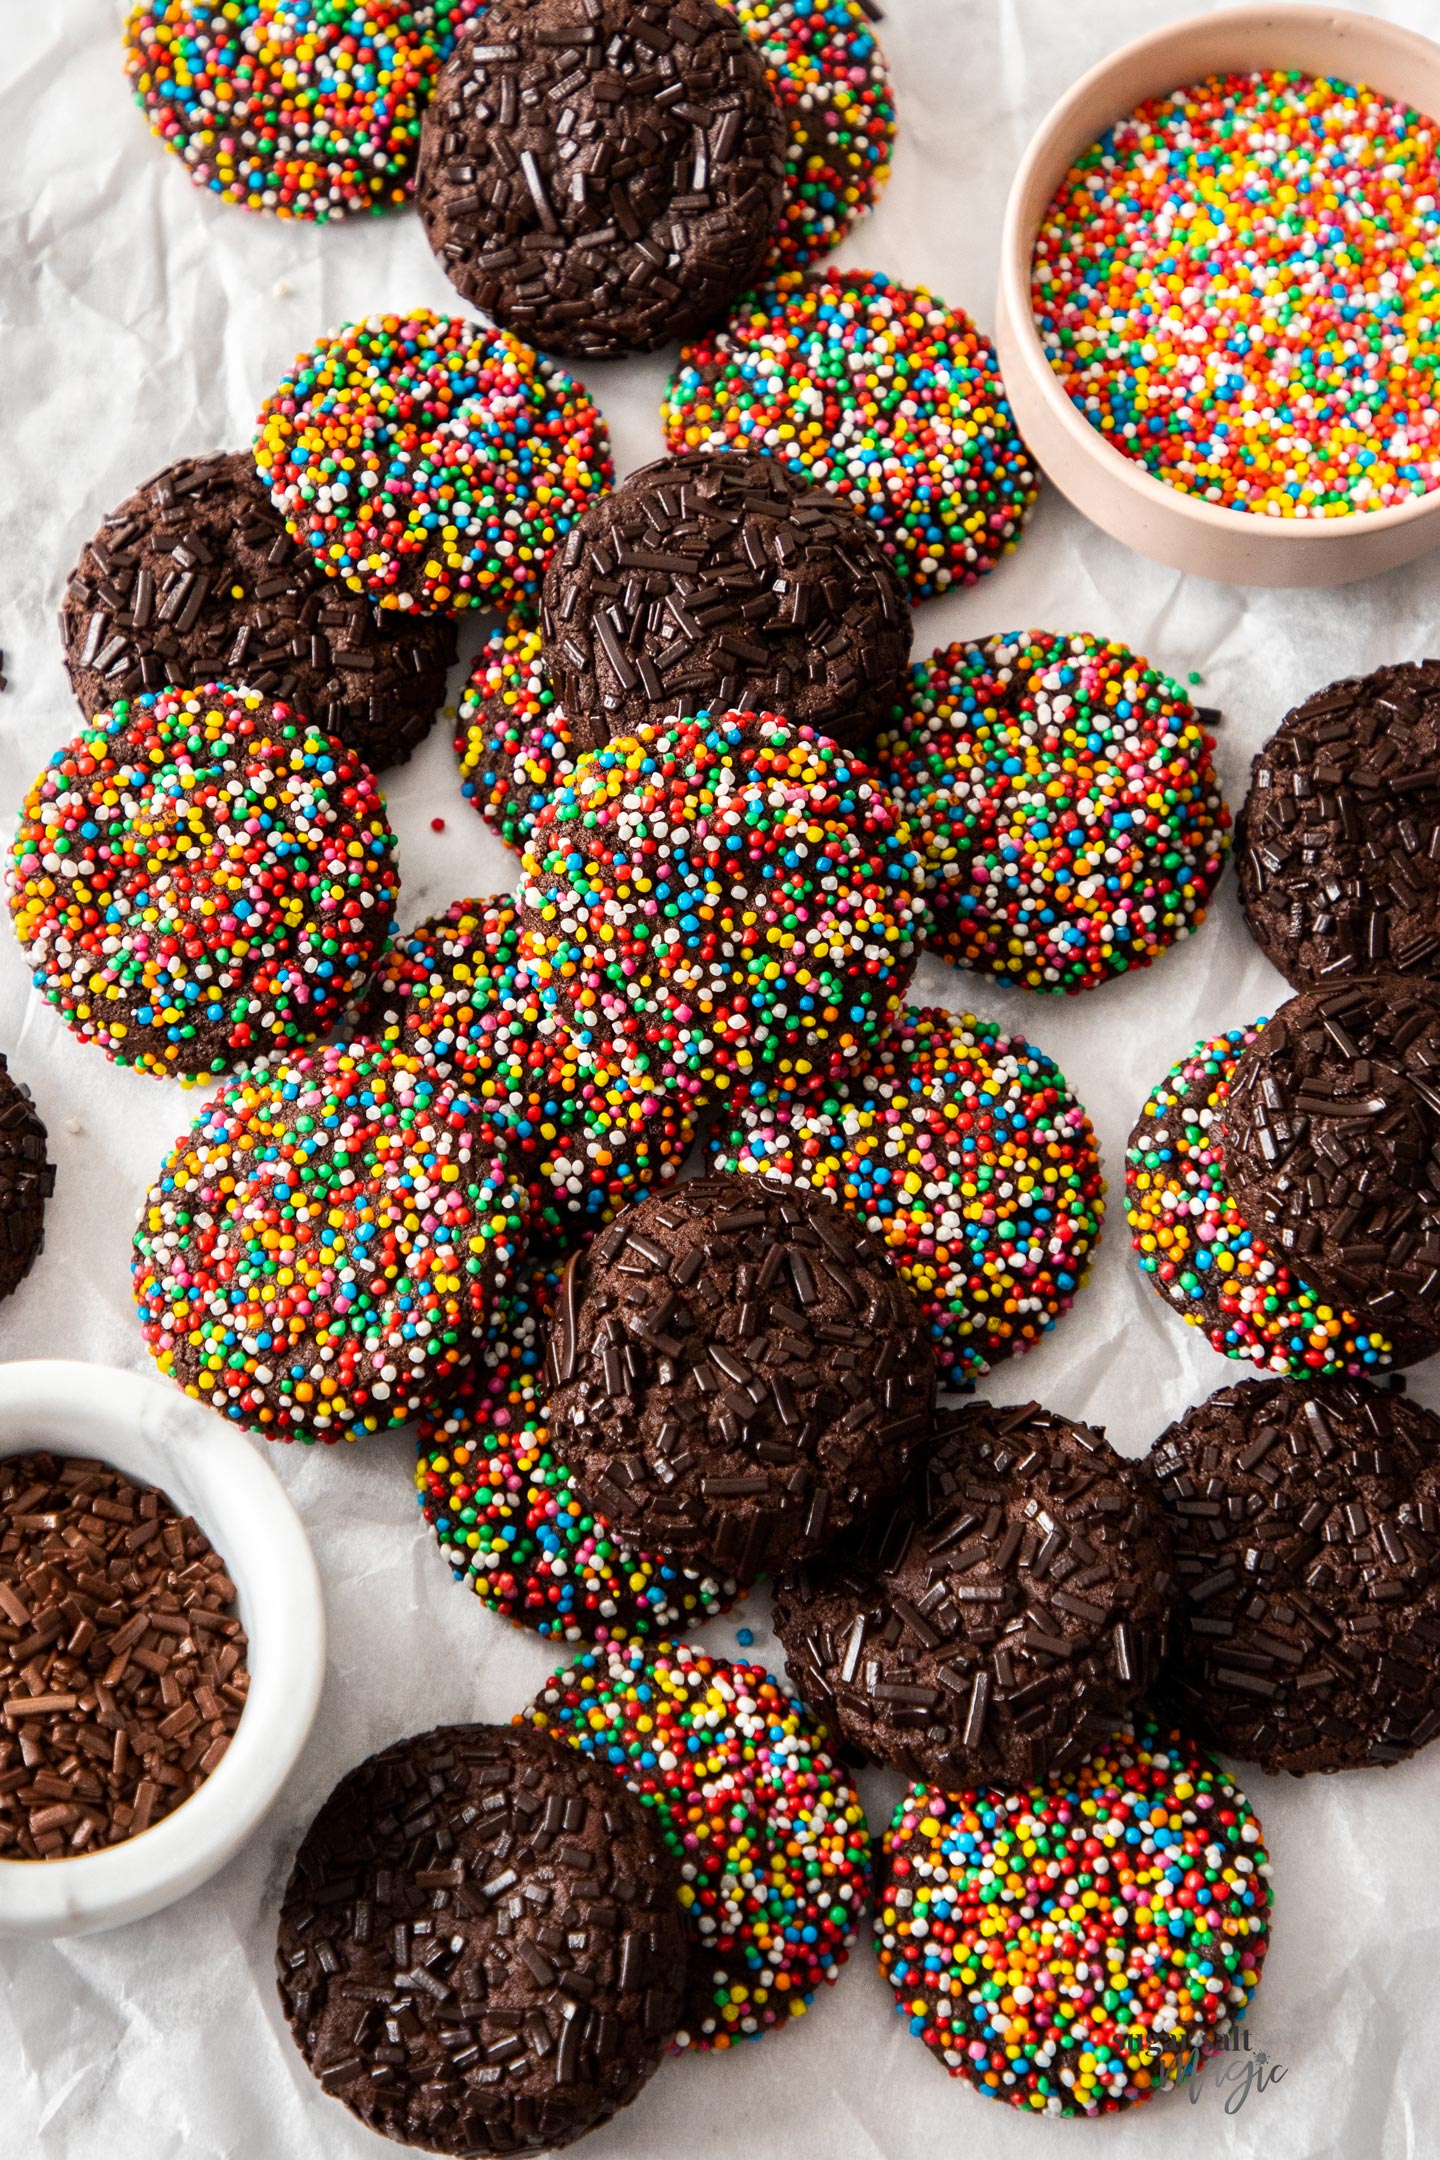 A batch of chocolate sprinkle cookies on a sheet of baking paper.